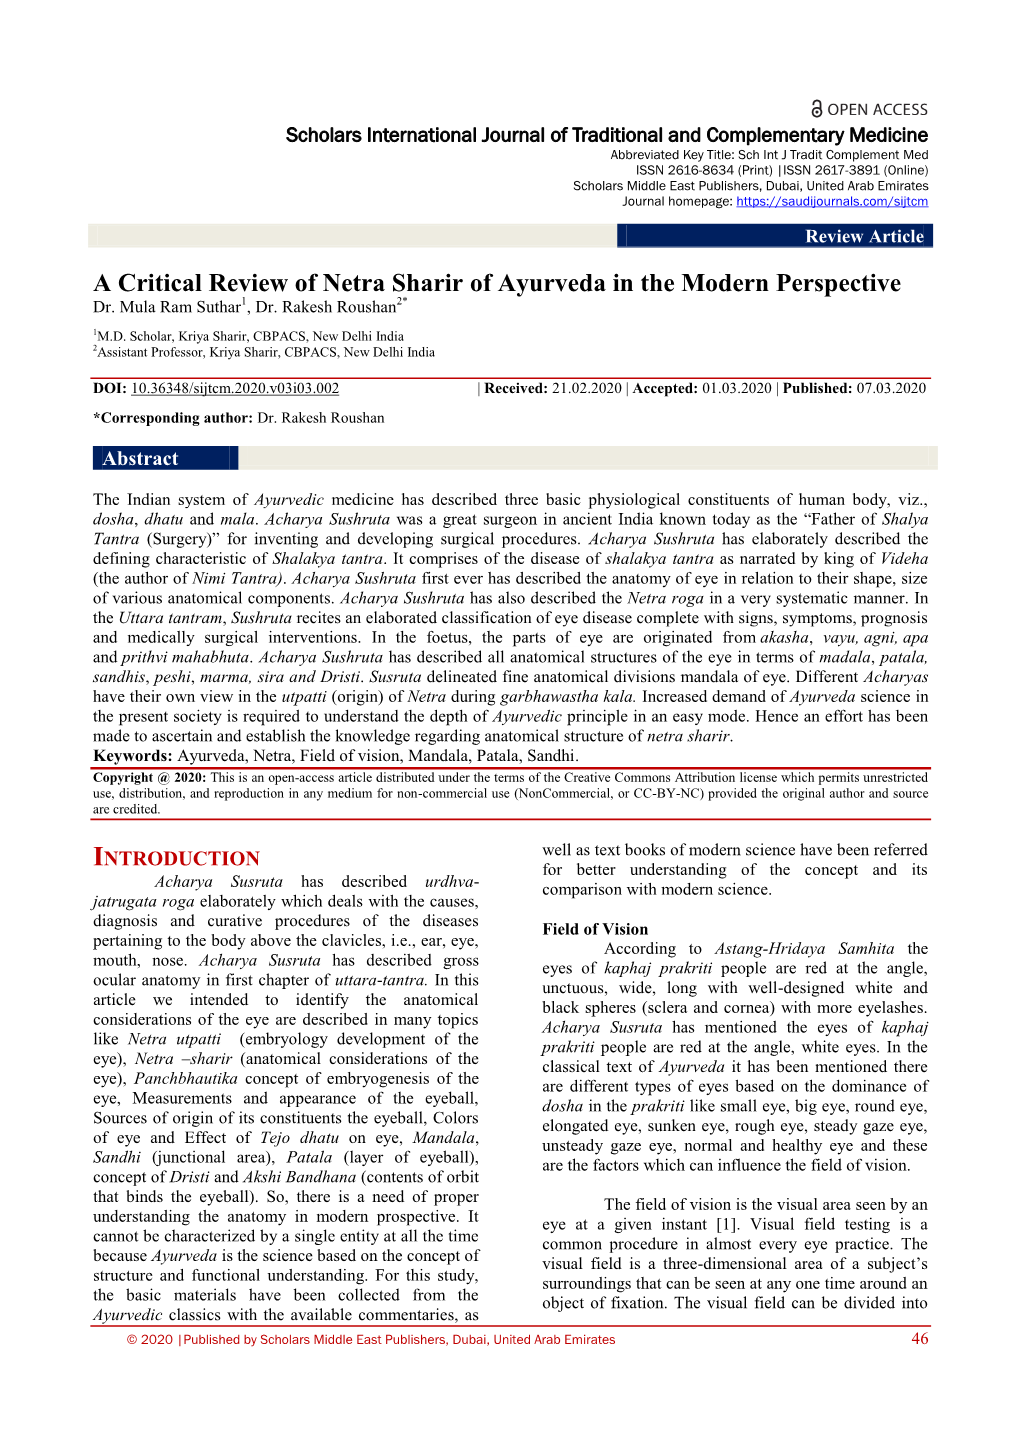 A Critical Review of Netra Sharir of Ayurveda in the Modern Perspective Dr